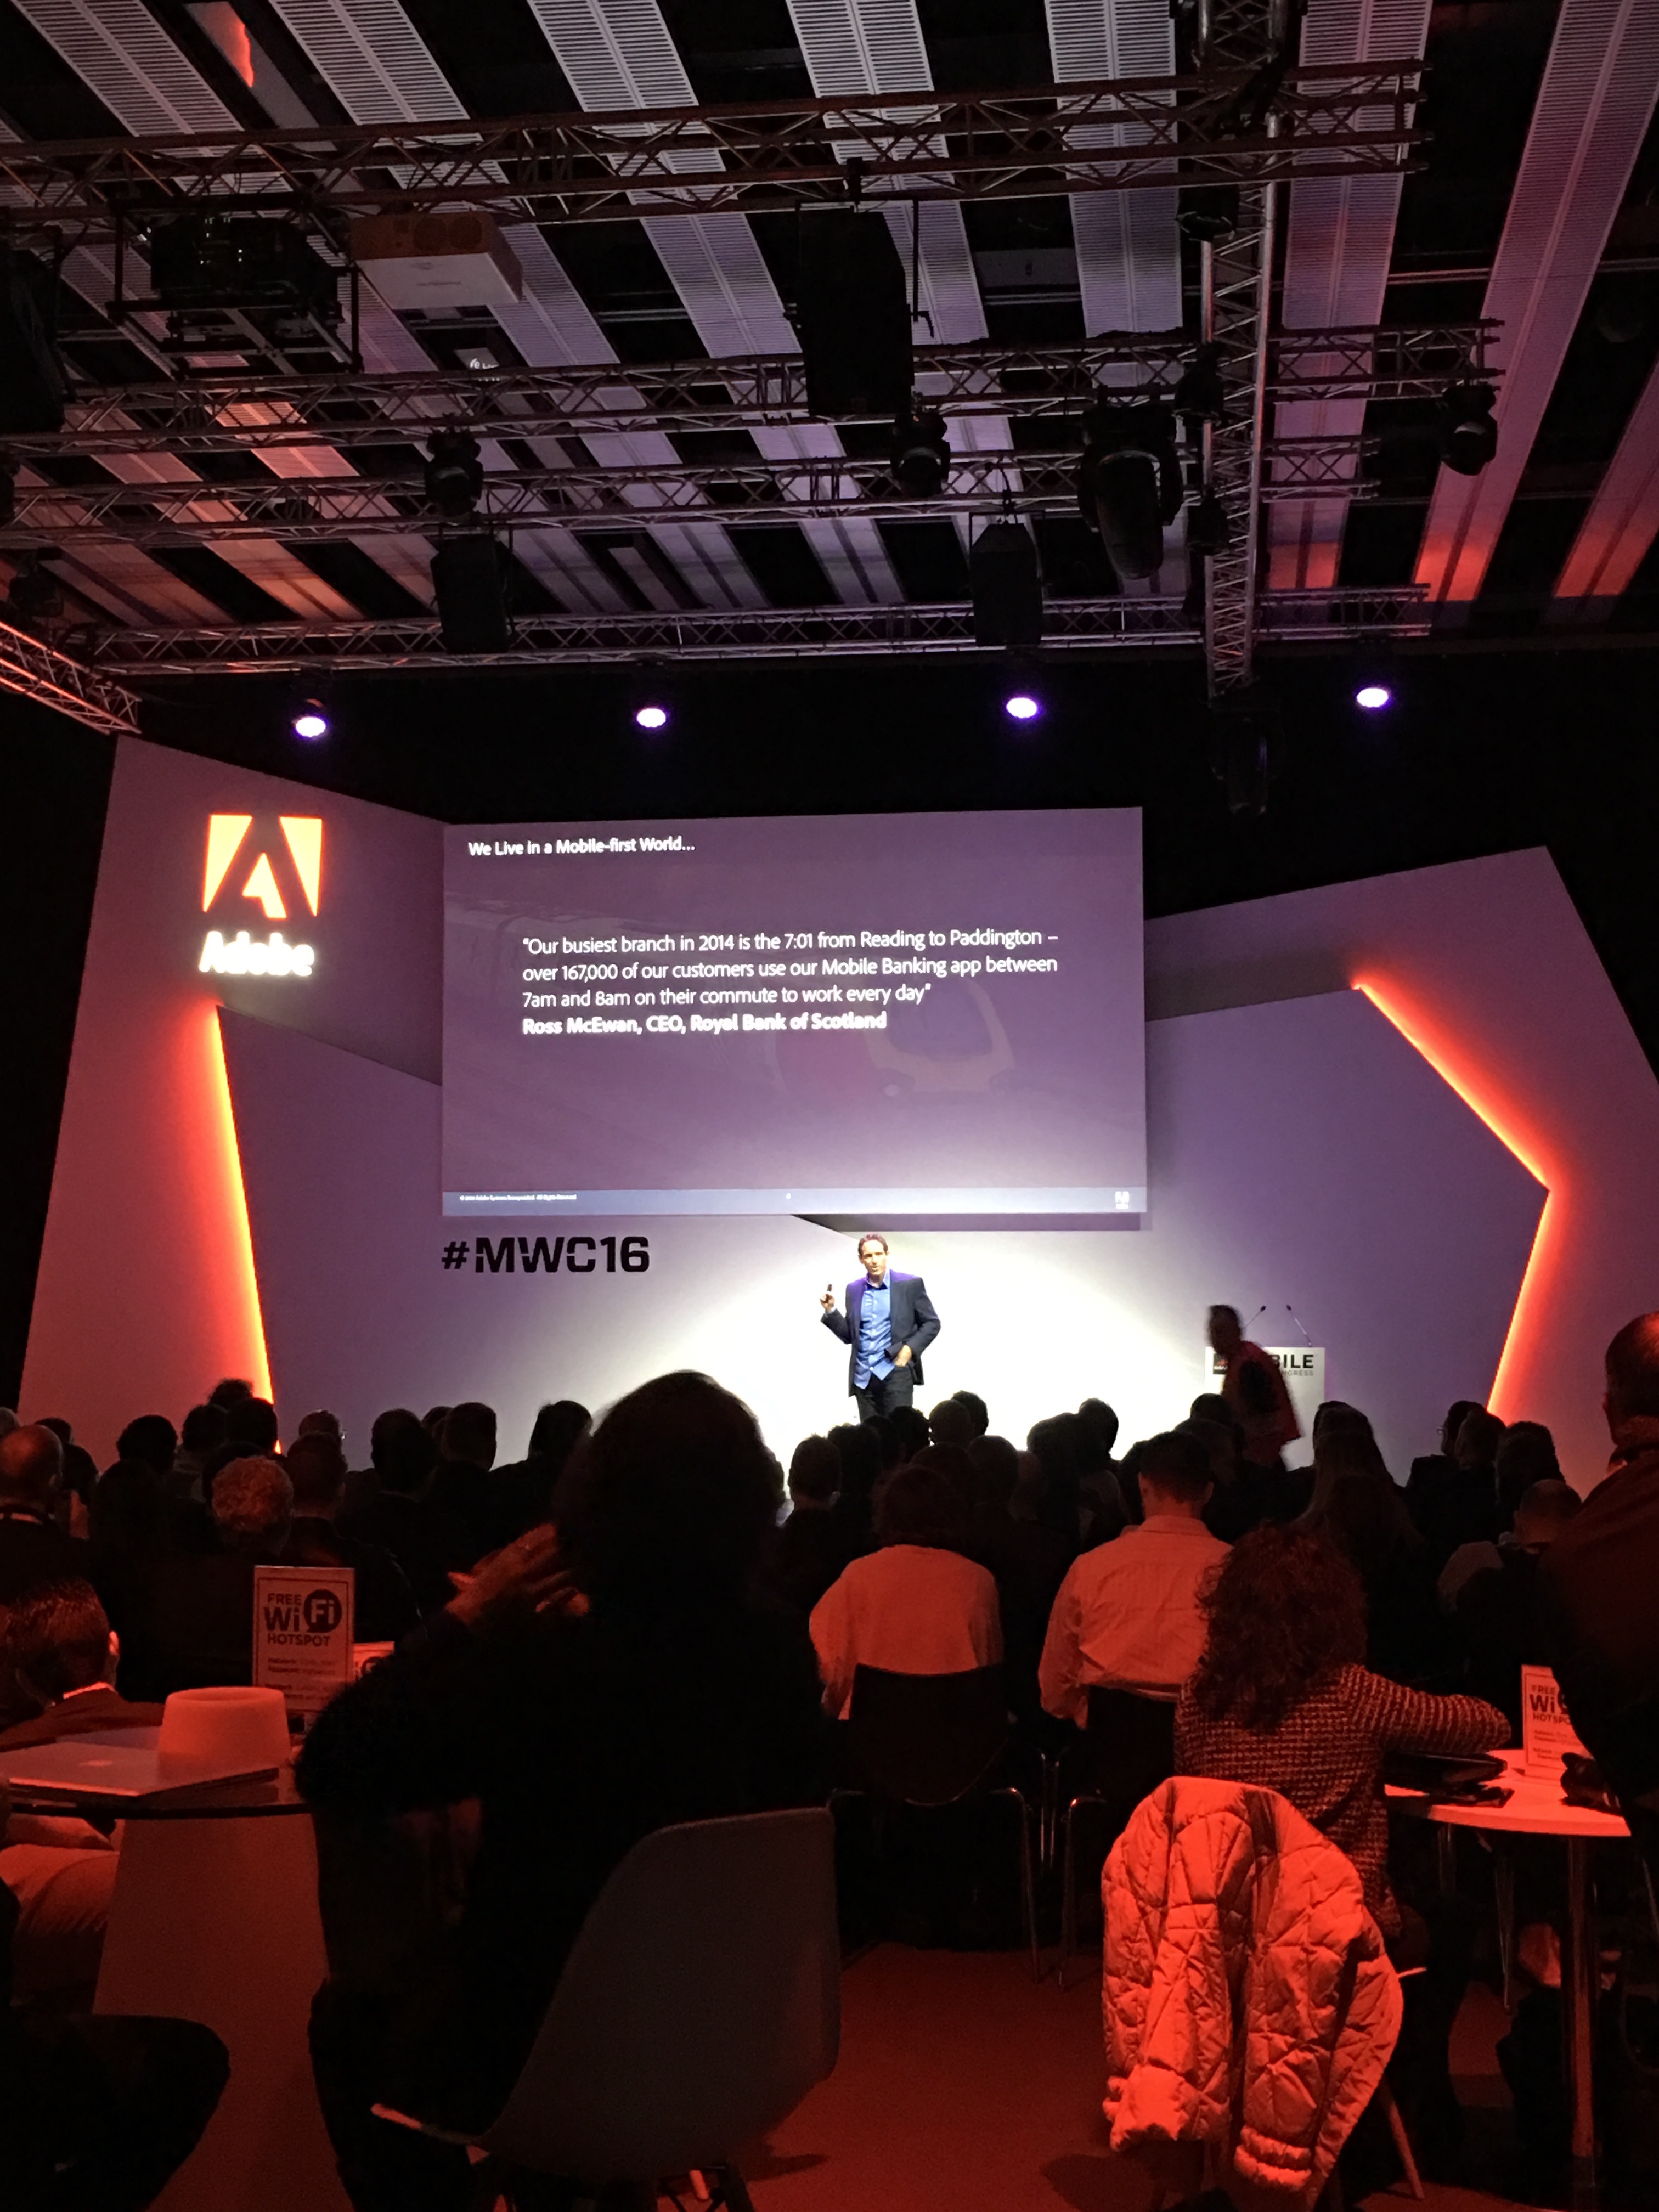 Adobe Session MWC16: Mobile is the Strategy